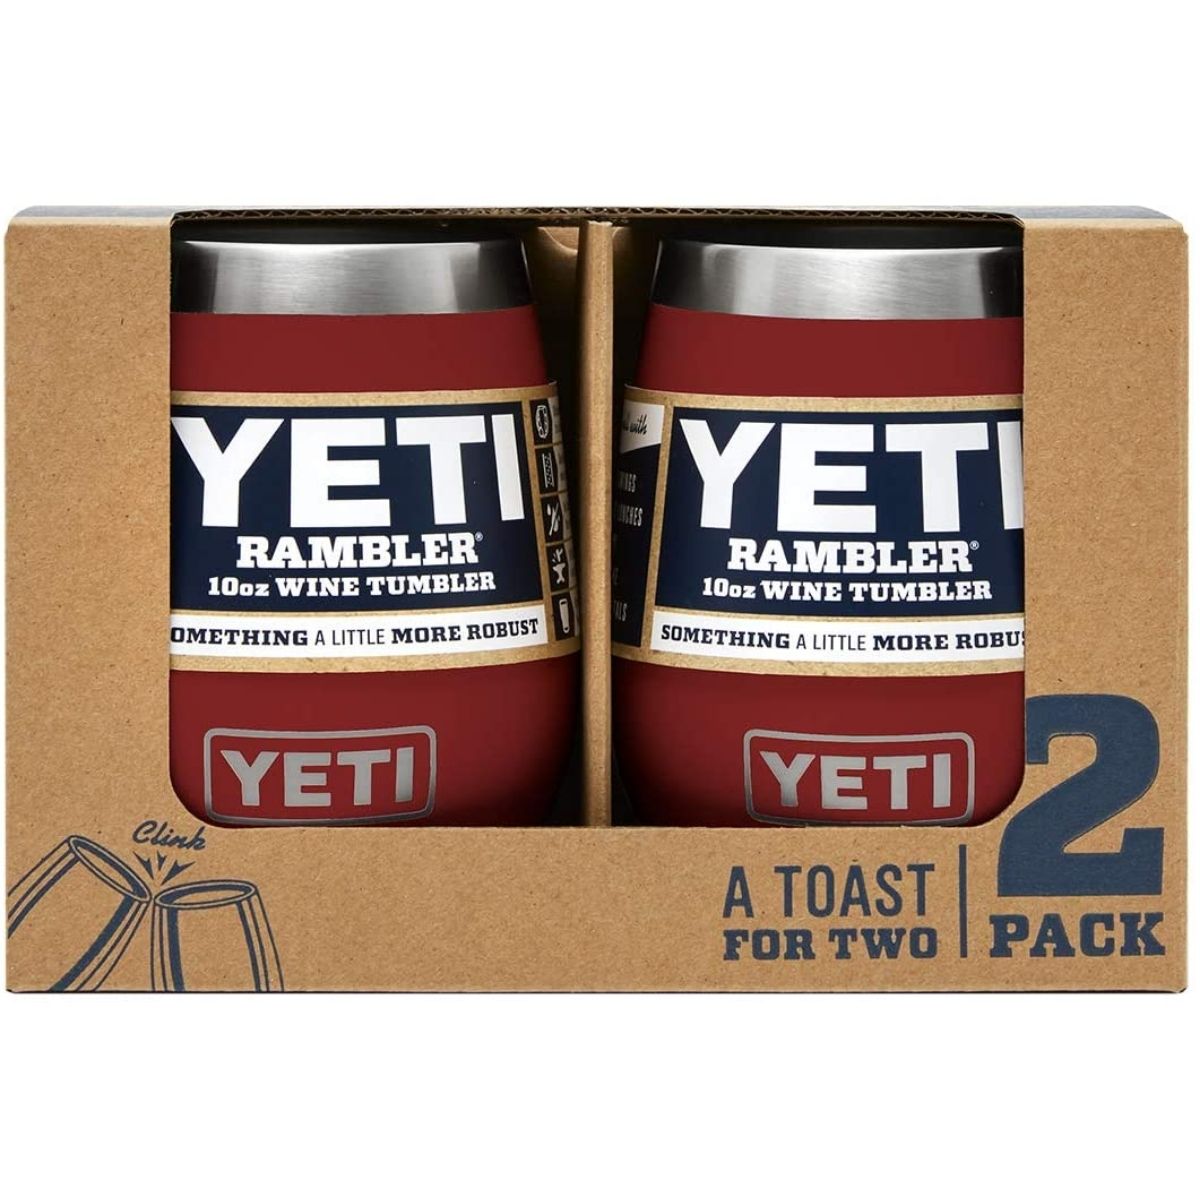 The Best Gifts for Wine Lovers Option: YETI Rambler 10 oz Wine Tumbler